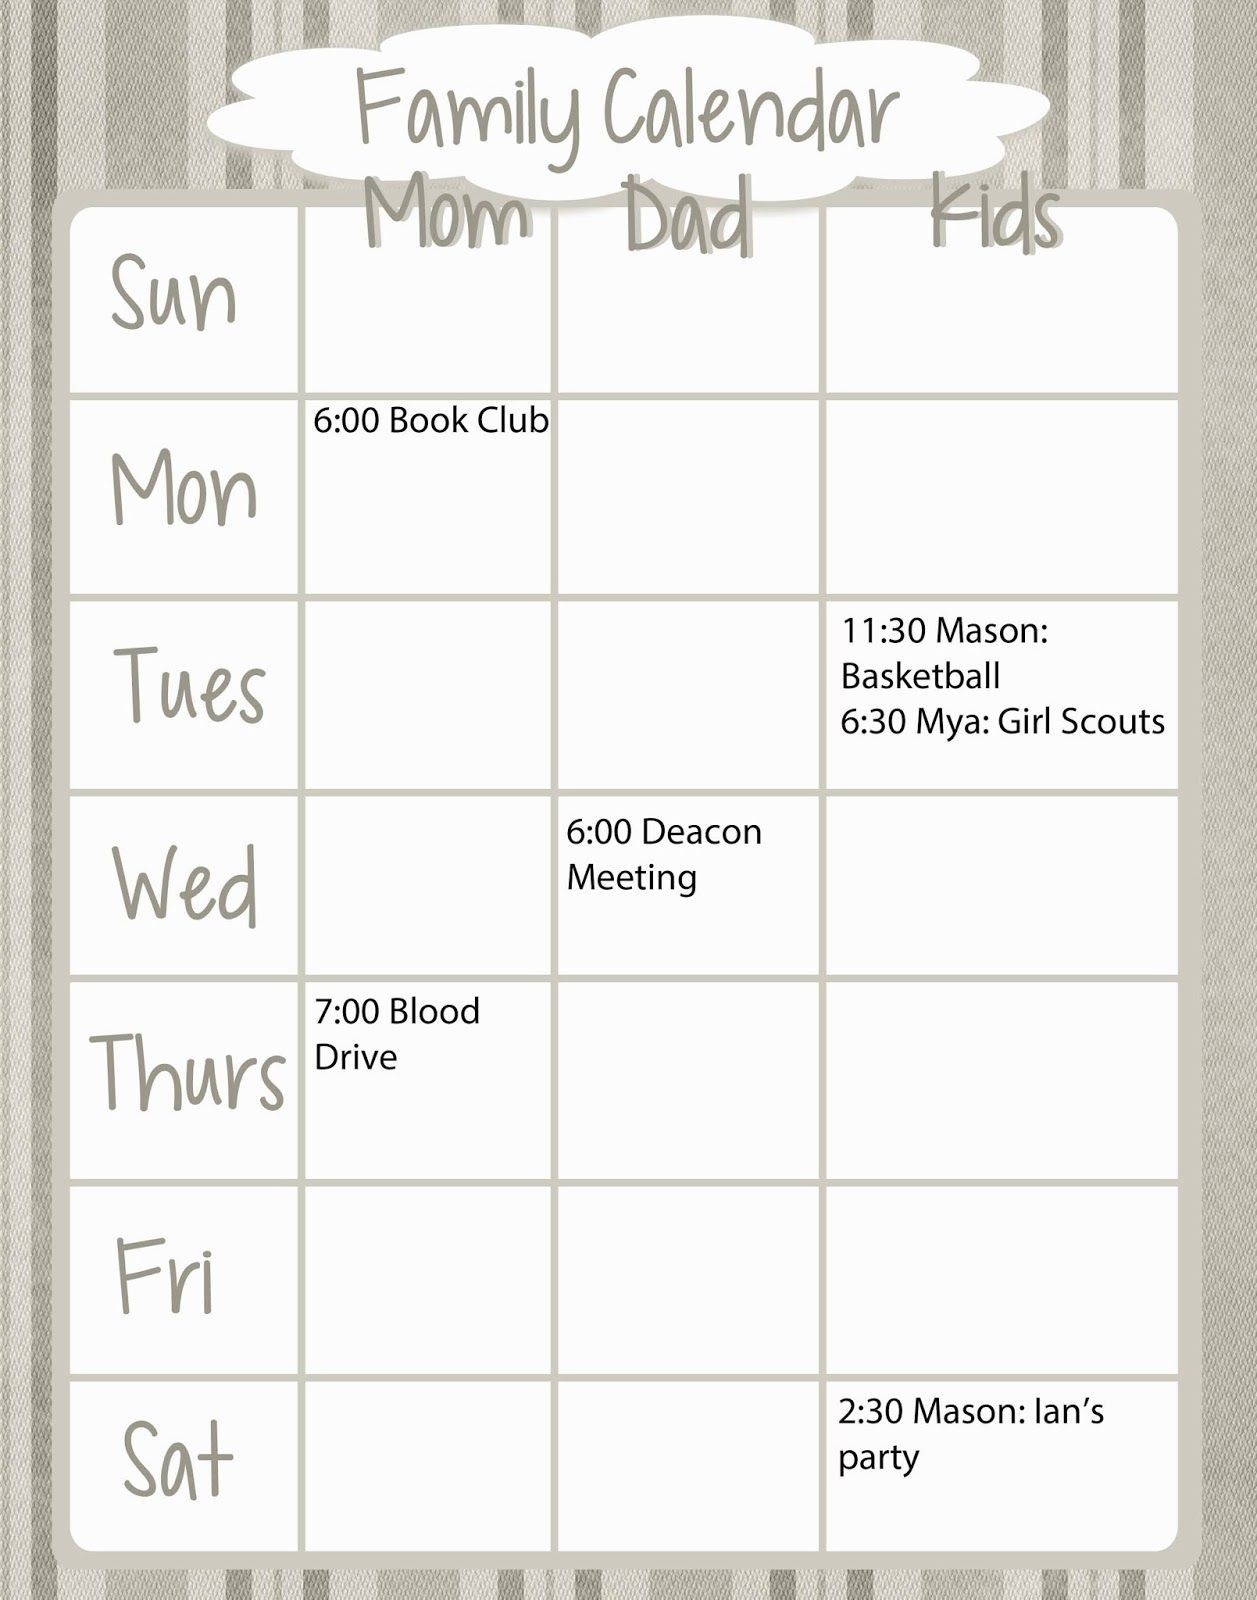 Family Calendar - Free Printable (With Images) | Weekly